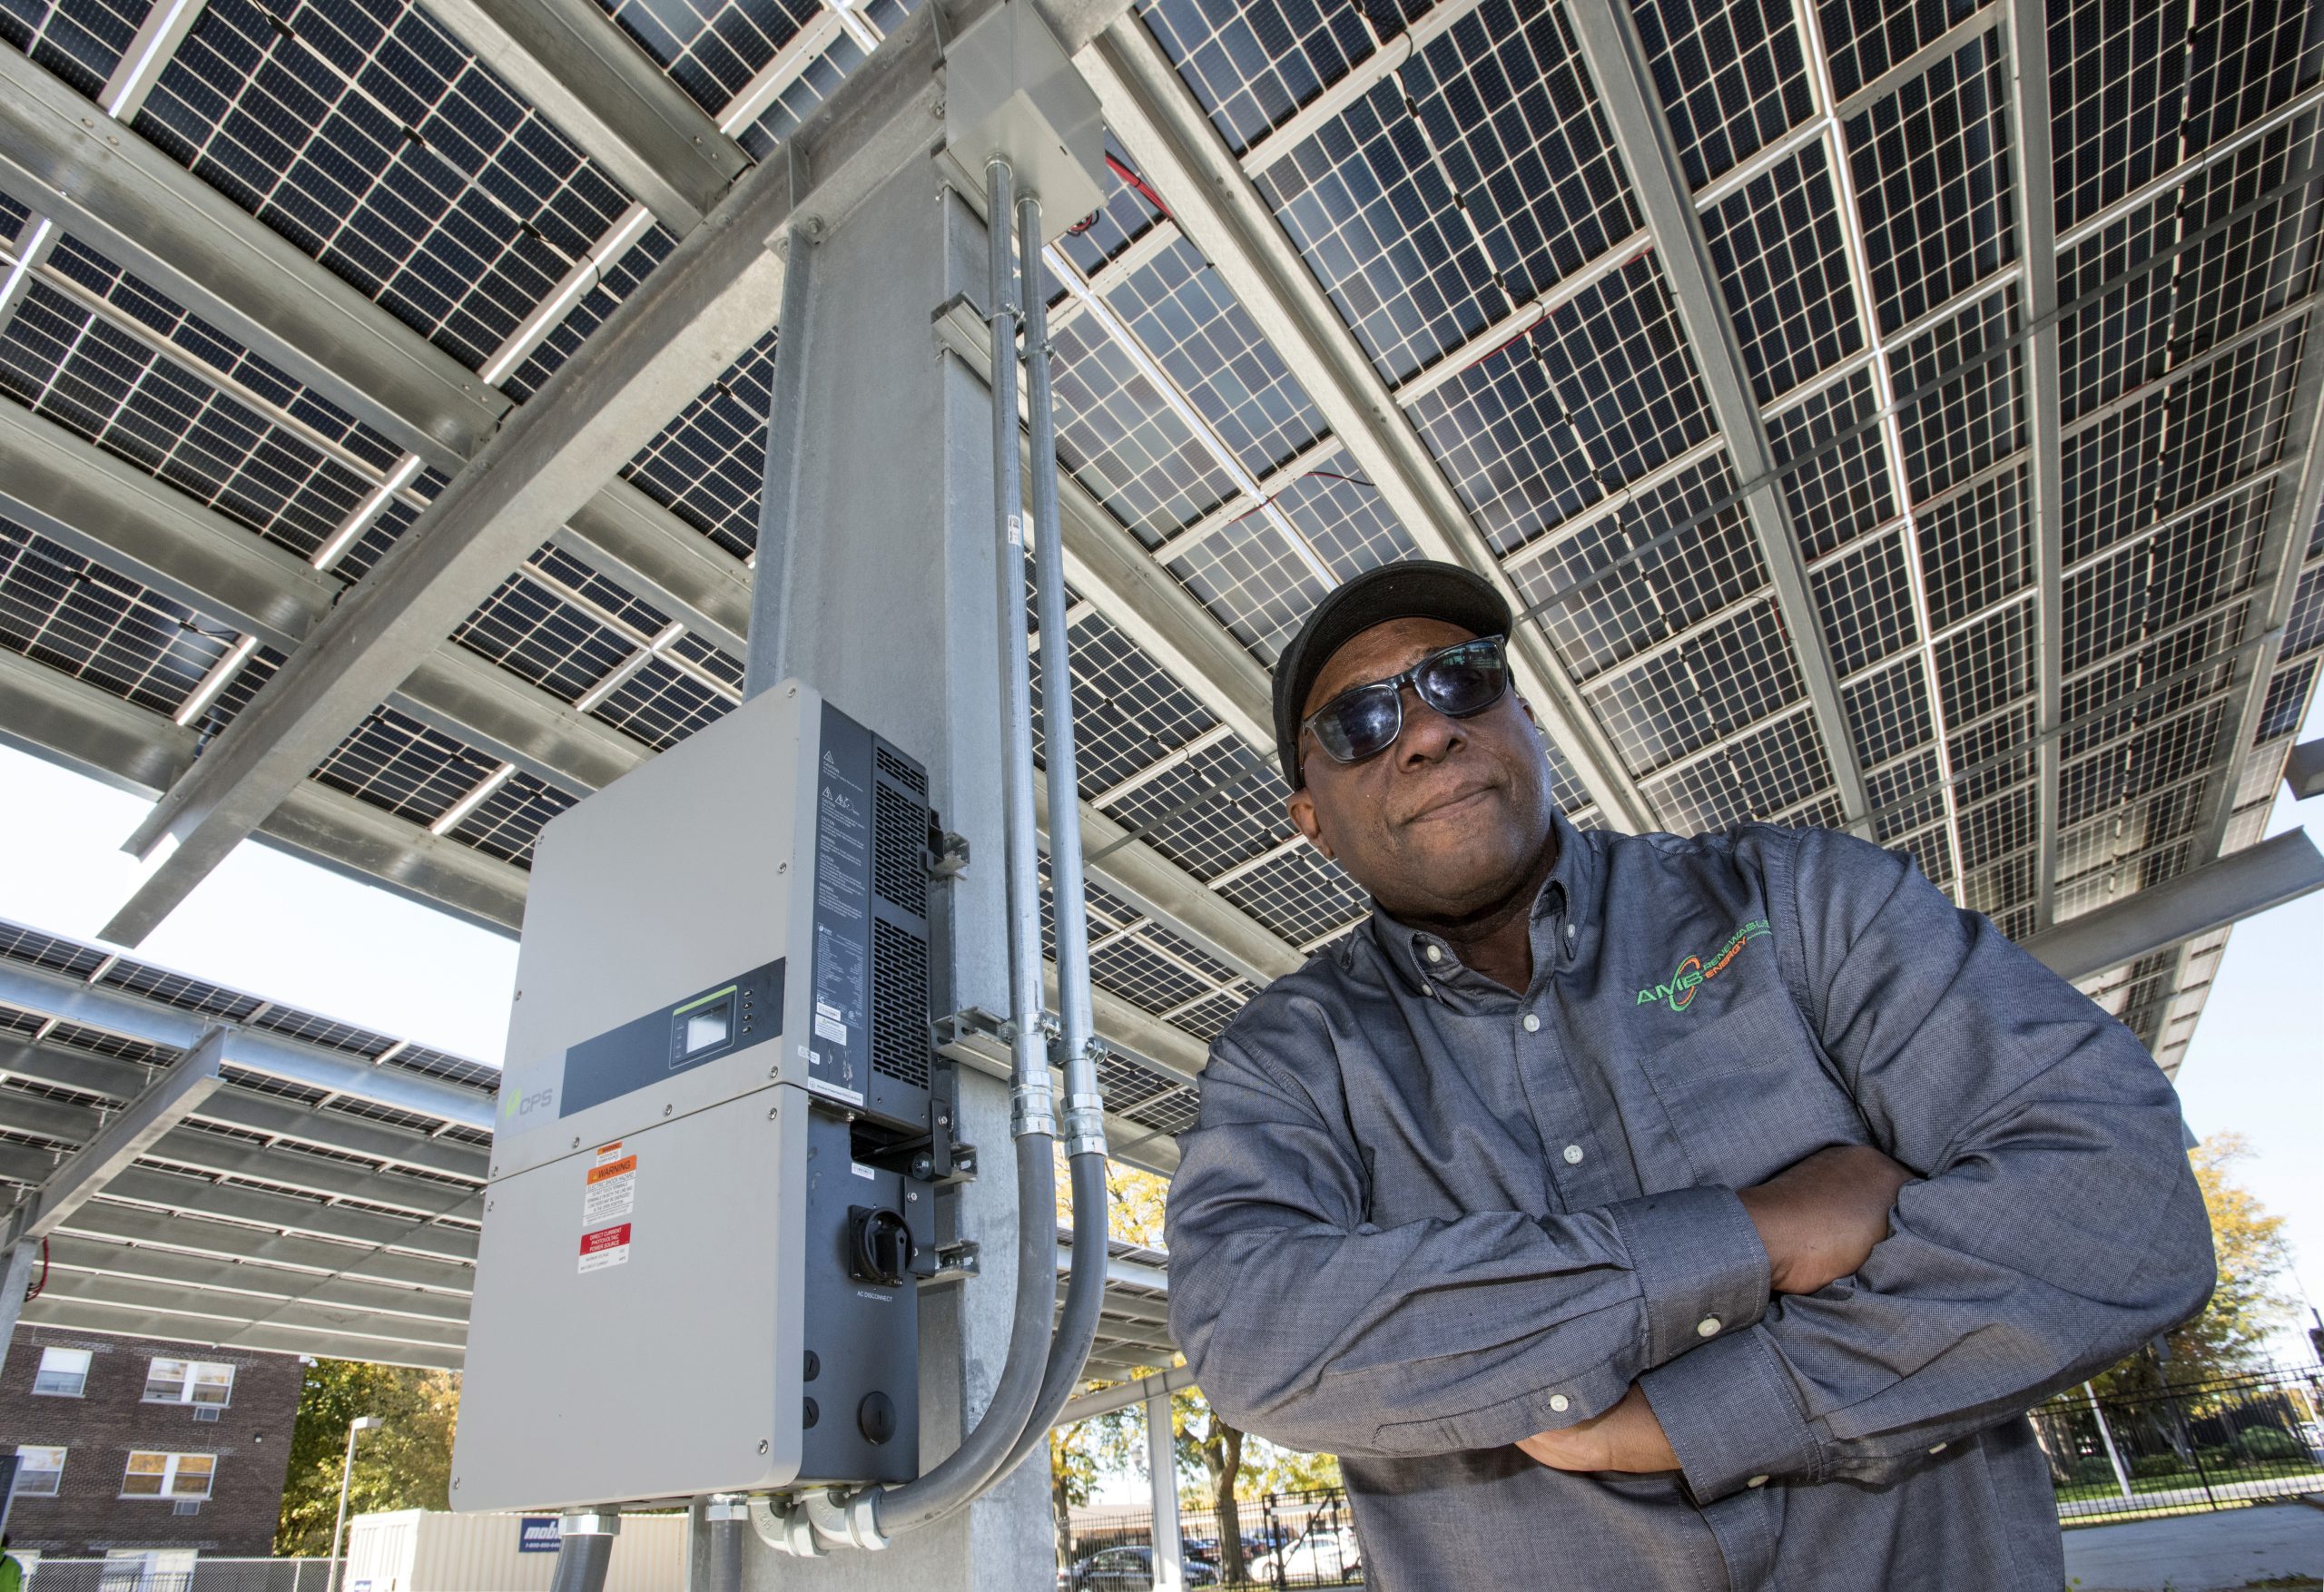 Arthur Burton poses with solar panels and electric vehicle charging stations in the Urban League parking lot.